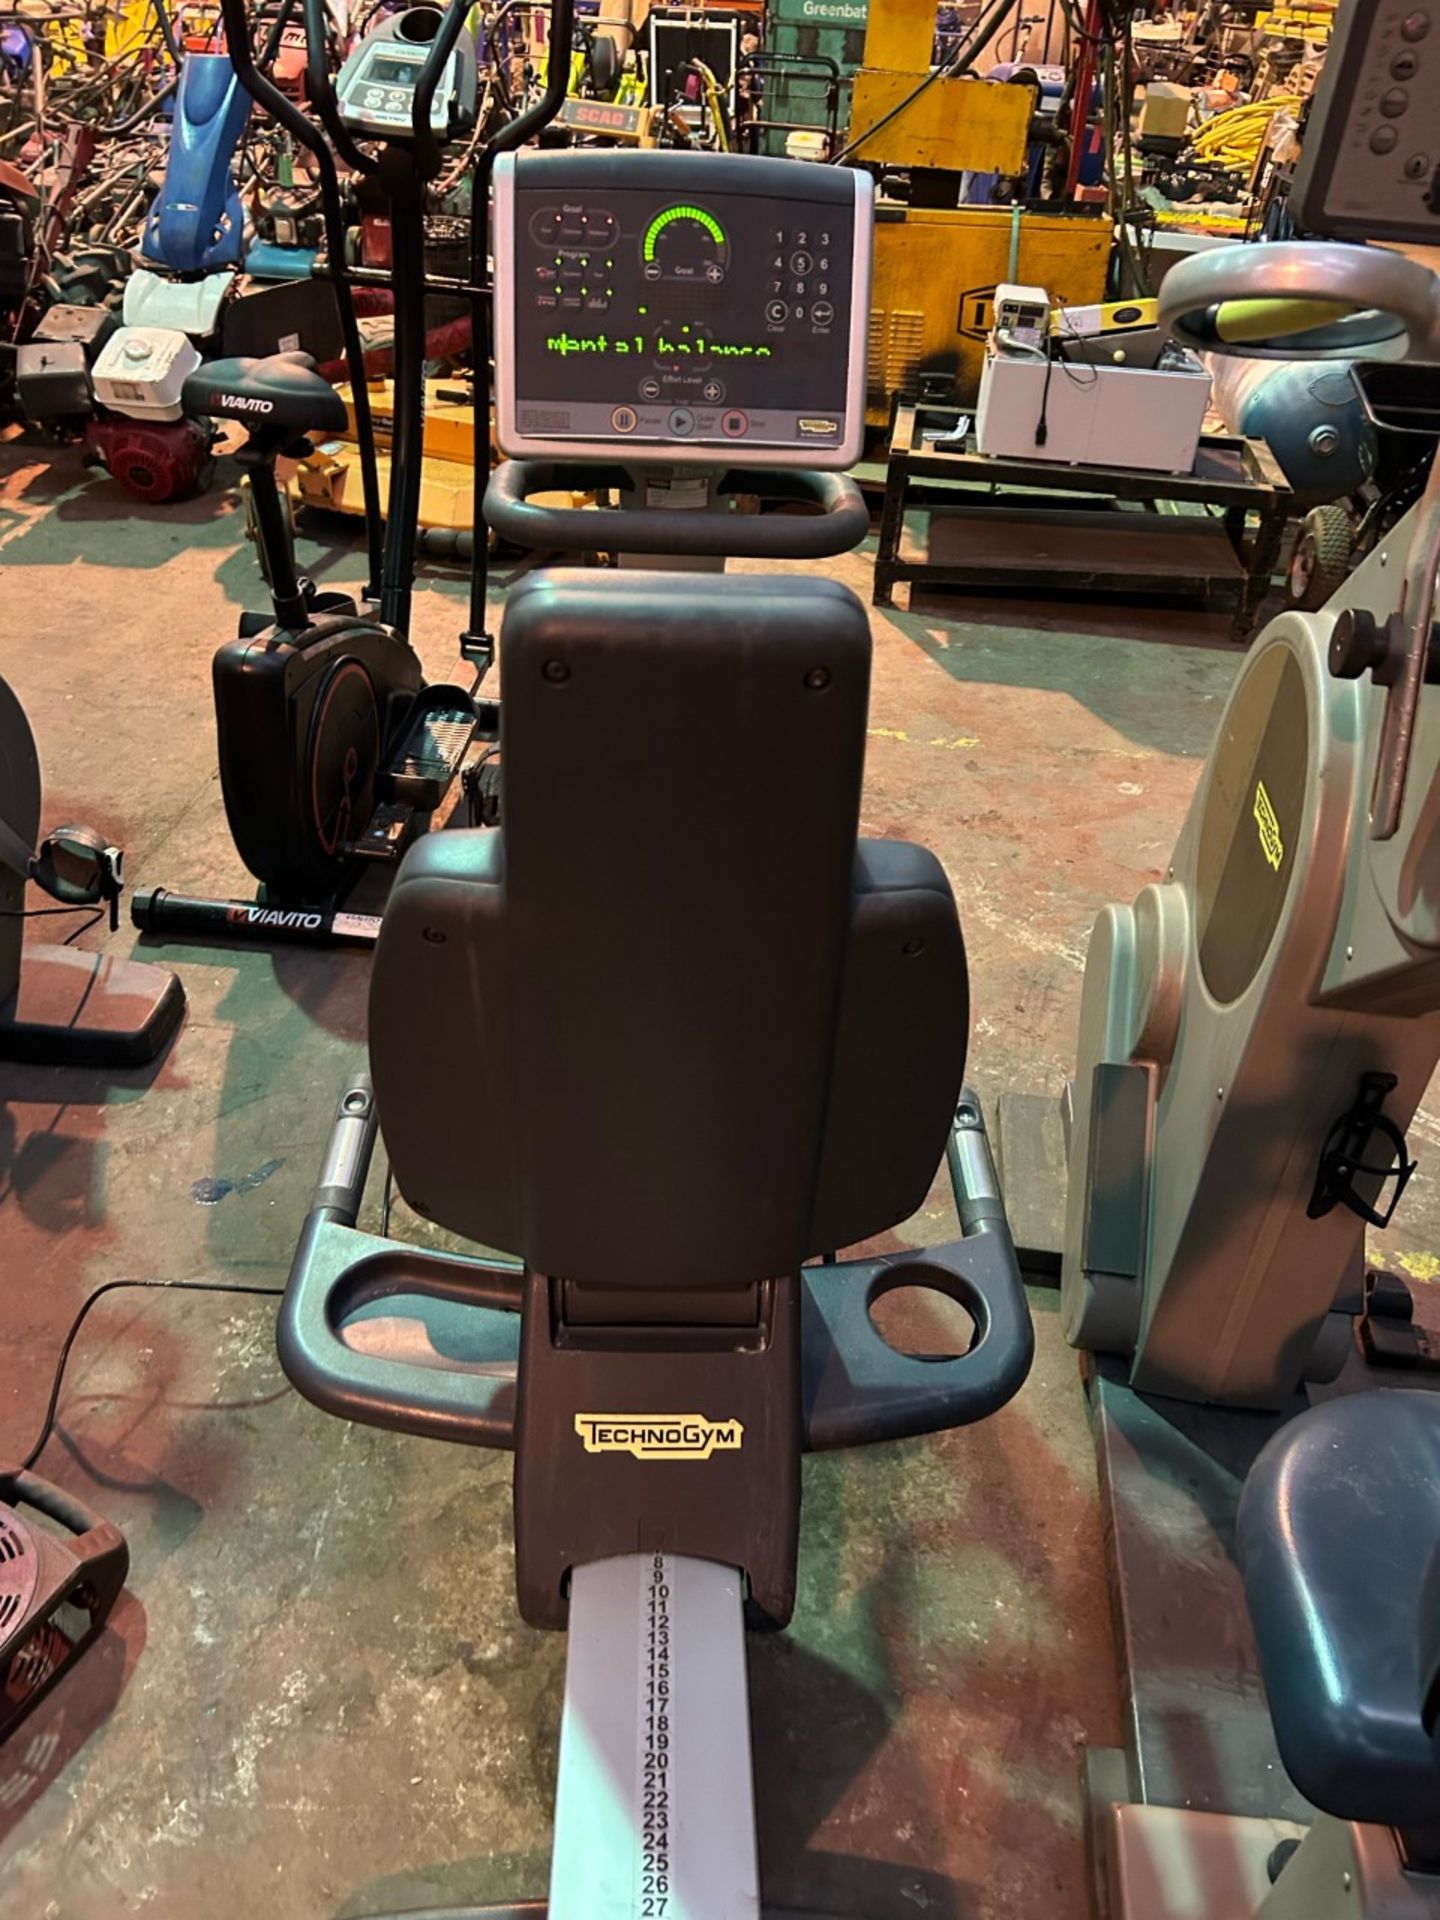 Technogym excite 700i recline recumbent exercise bike. Excellent condition, full working order